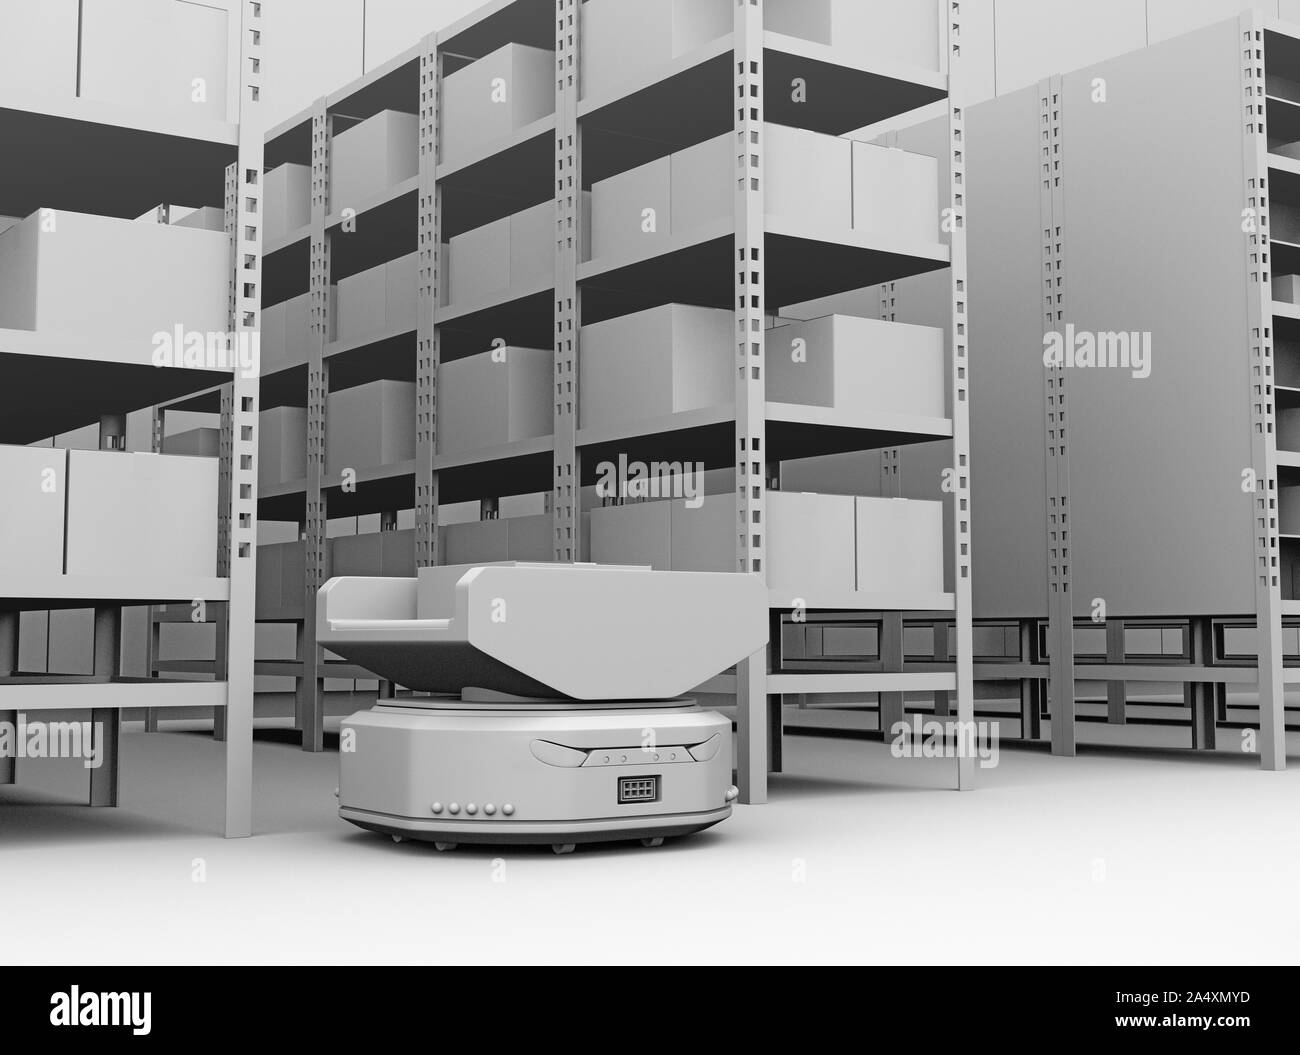 Autonomous Mobile Robots in modern warehouse. 3D clay rendering image. Stock Photo